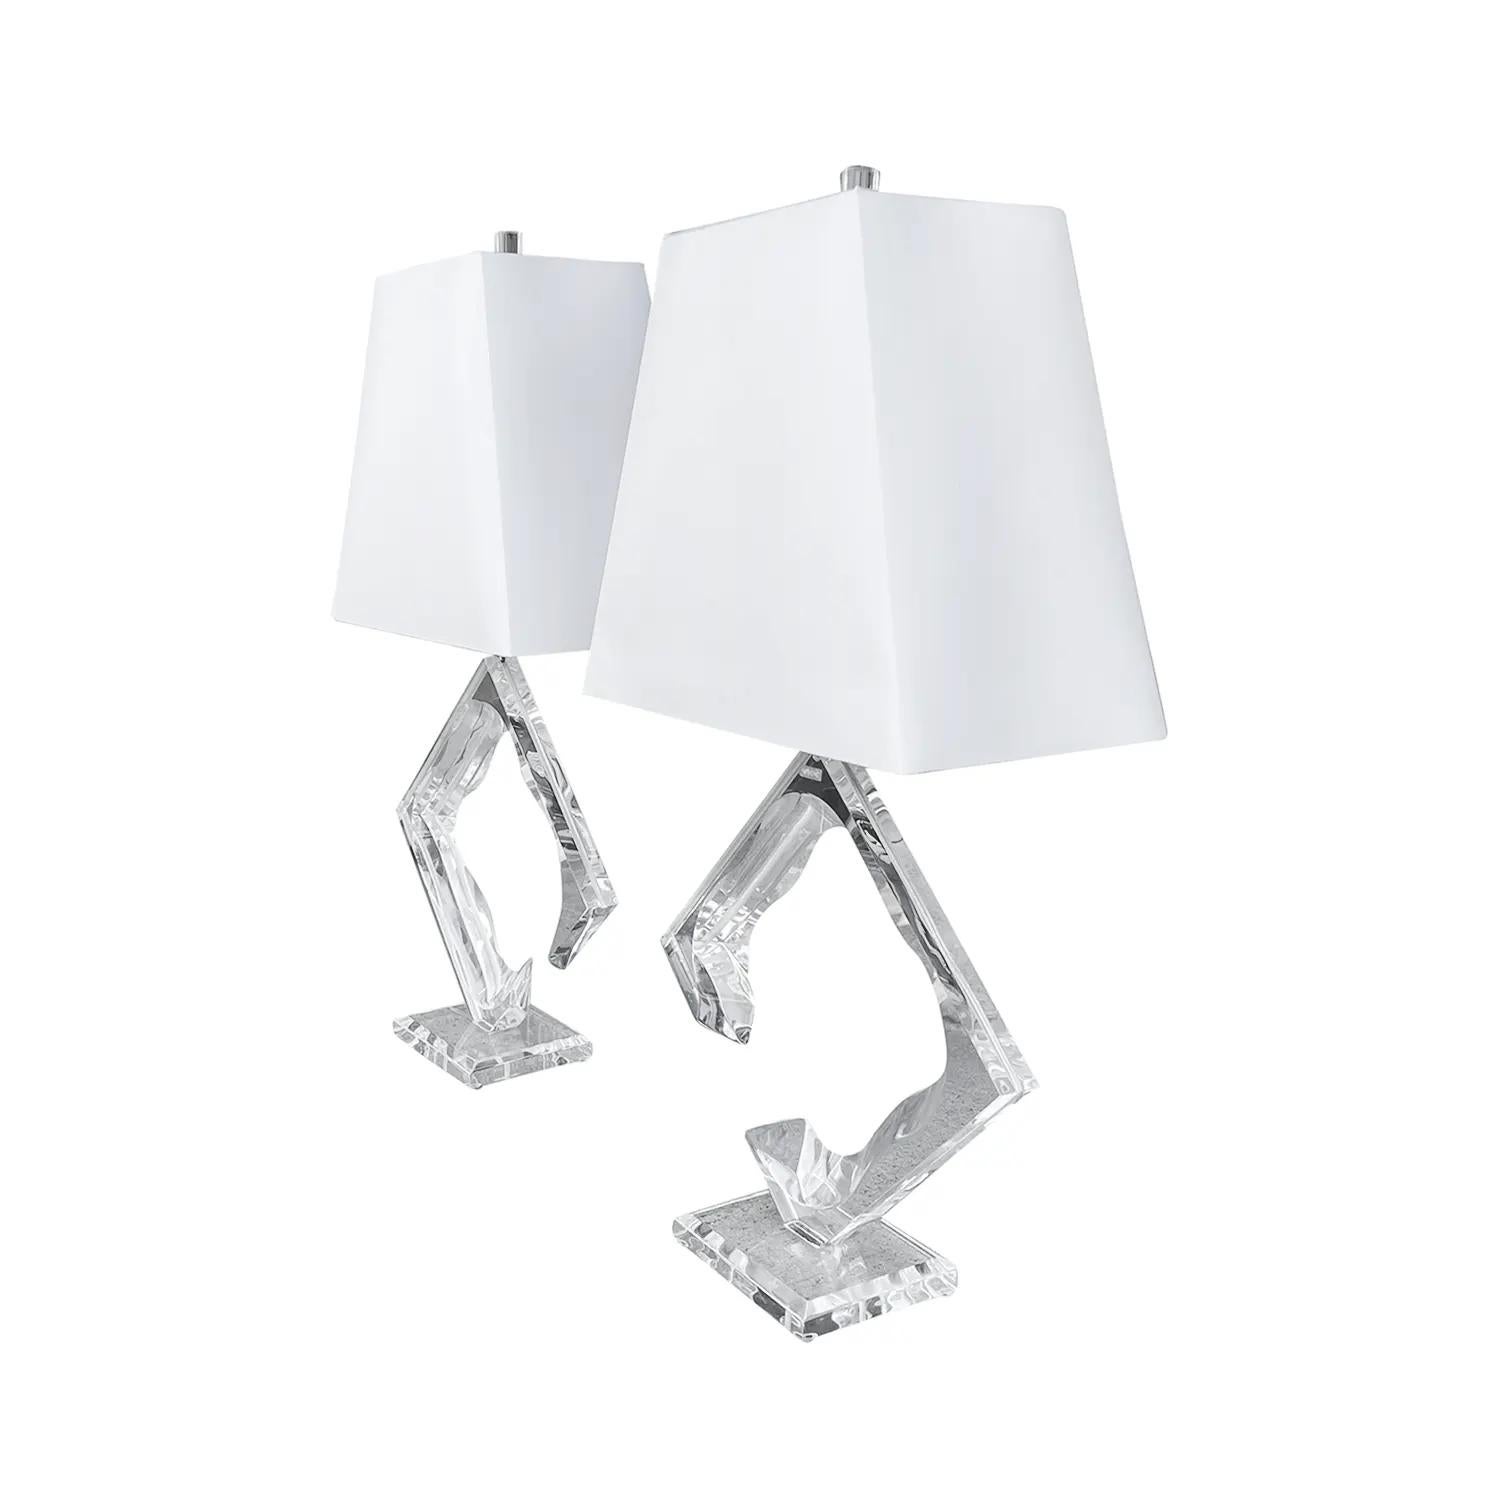 Hand-Crafted 20th Century American Pair of Acrylic Table Lamps, Desk Lights by Hivo Van Teal